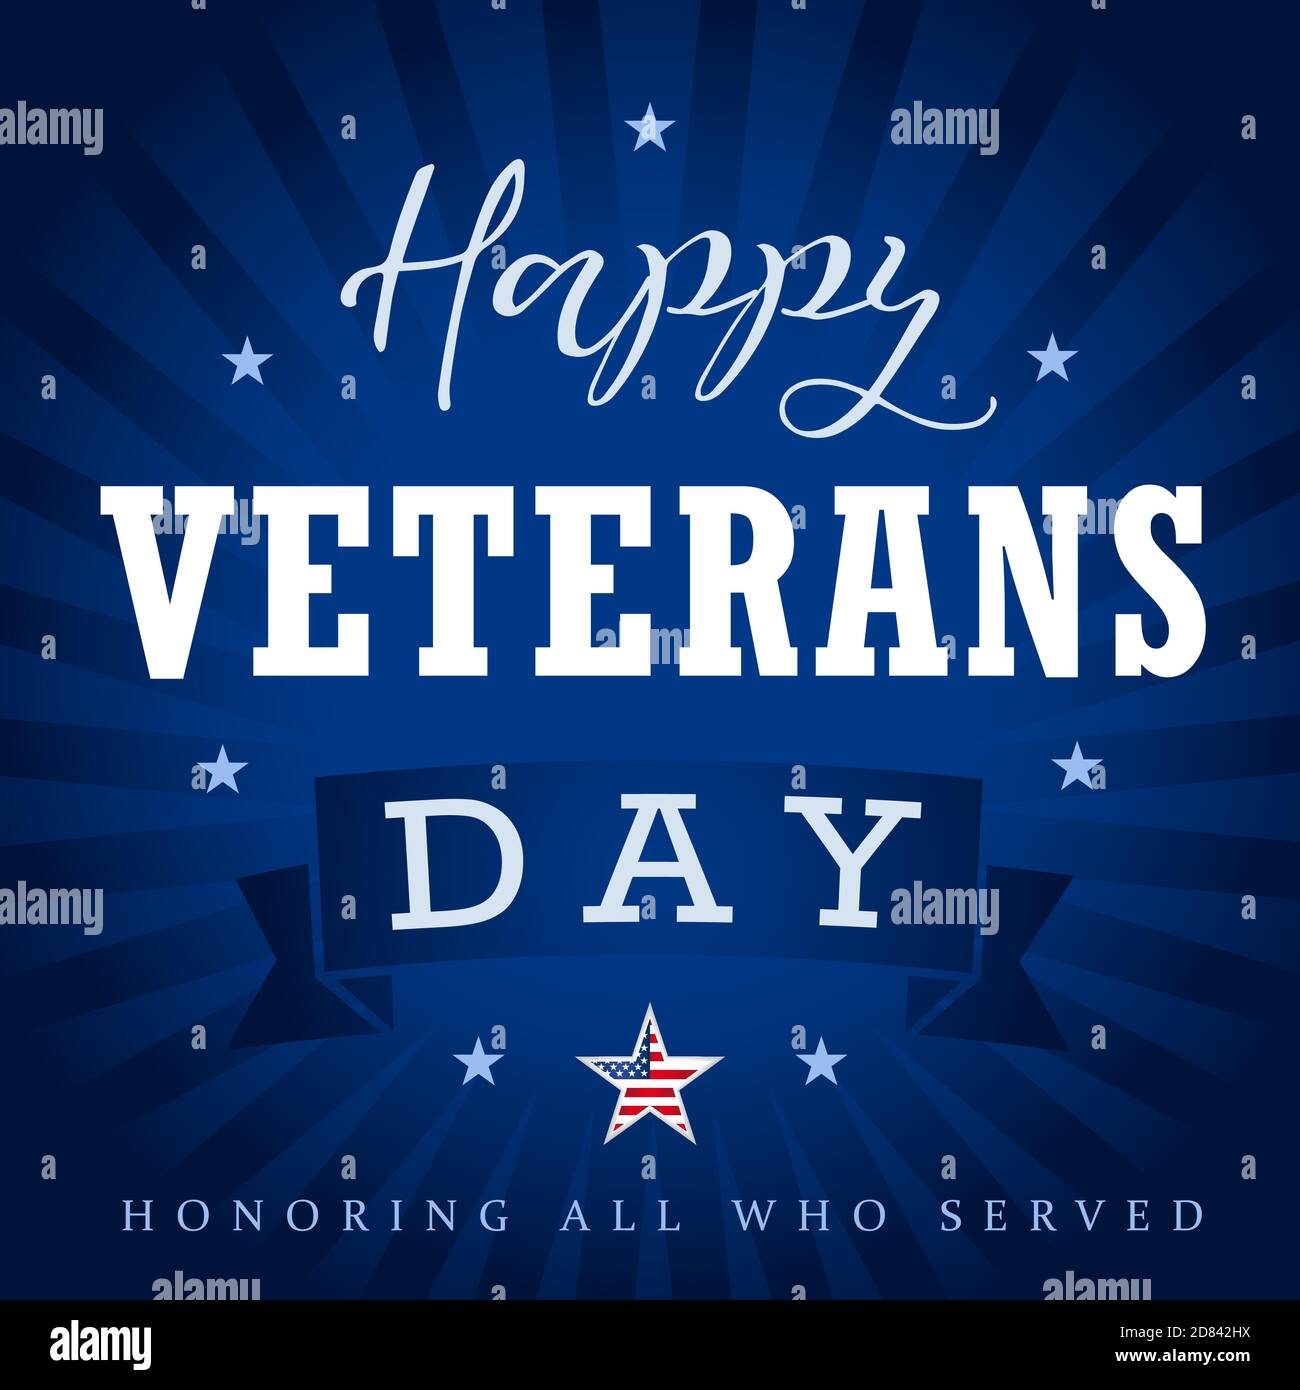 Happy Veterans Day USA creative banner. Isolated abstract graphic design template. Honoring all who served. Calligraphic lettering. Thank you veterans Stock Vector